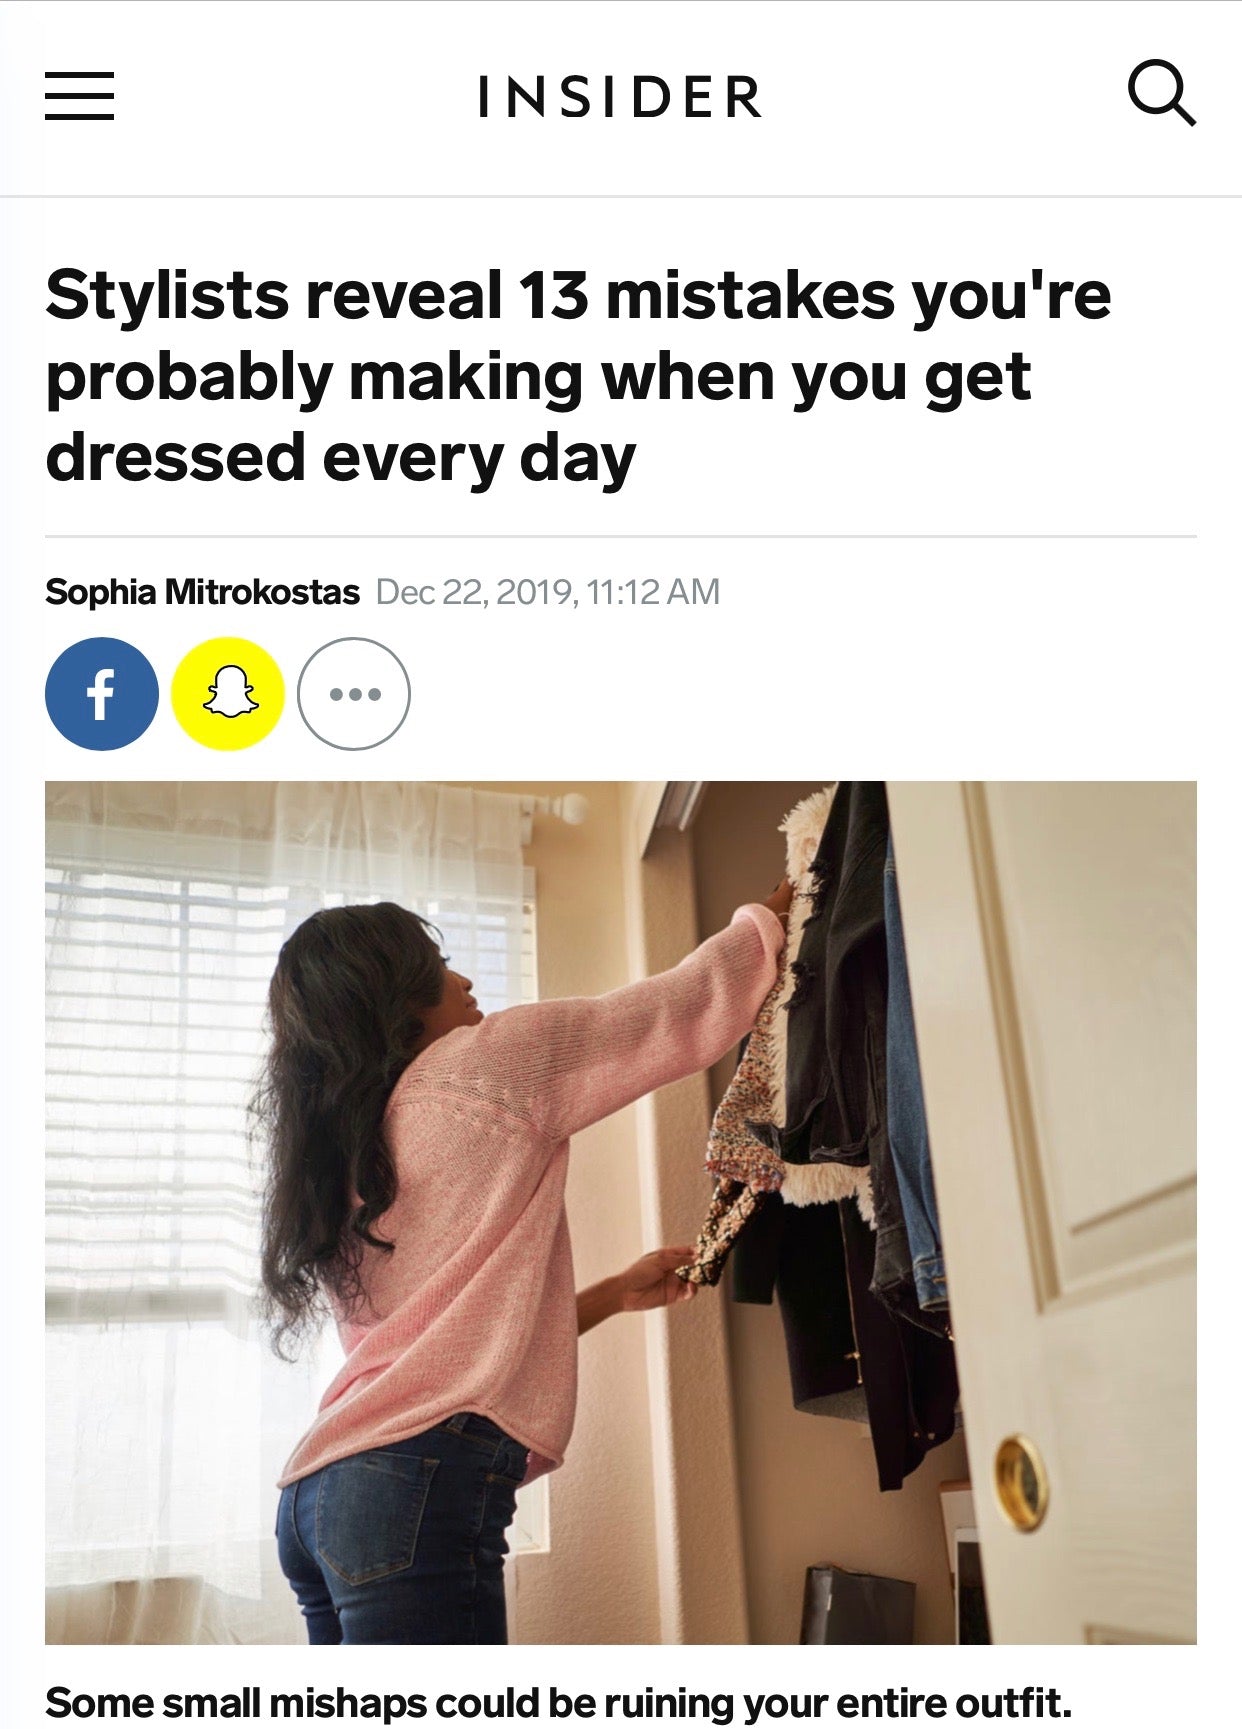 BUSINESS INSIDER: Stylists reveal 13 mistakes you're probably making when you get dressed every day